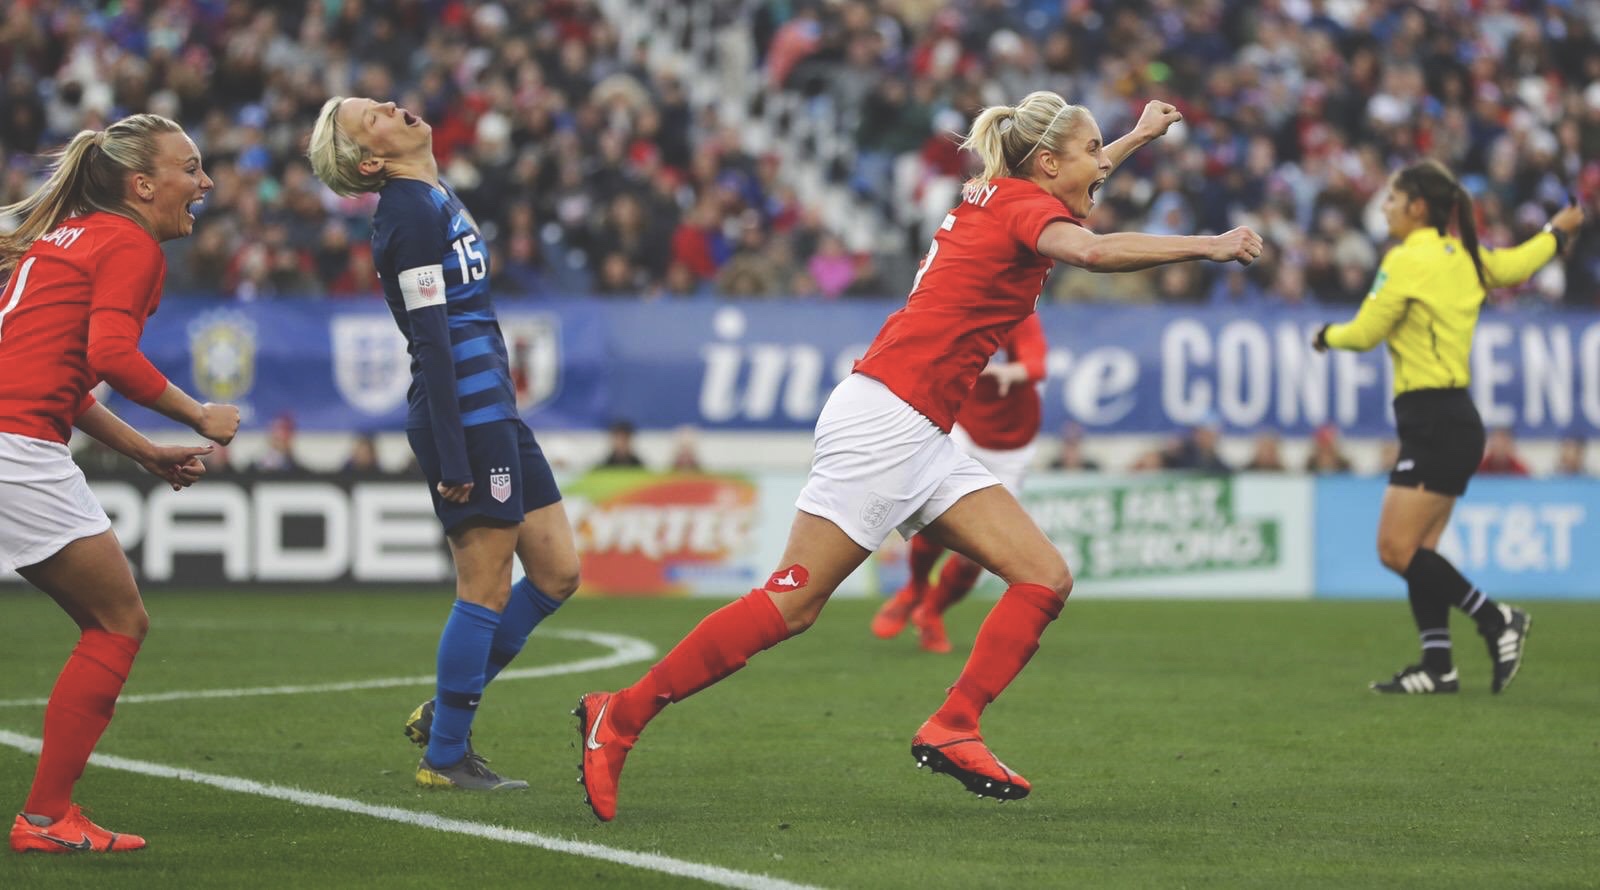 Steph Houghton celebrates scoring against the USA in the She Believes Cup. Photo from @StephHoughton2